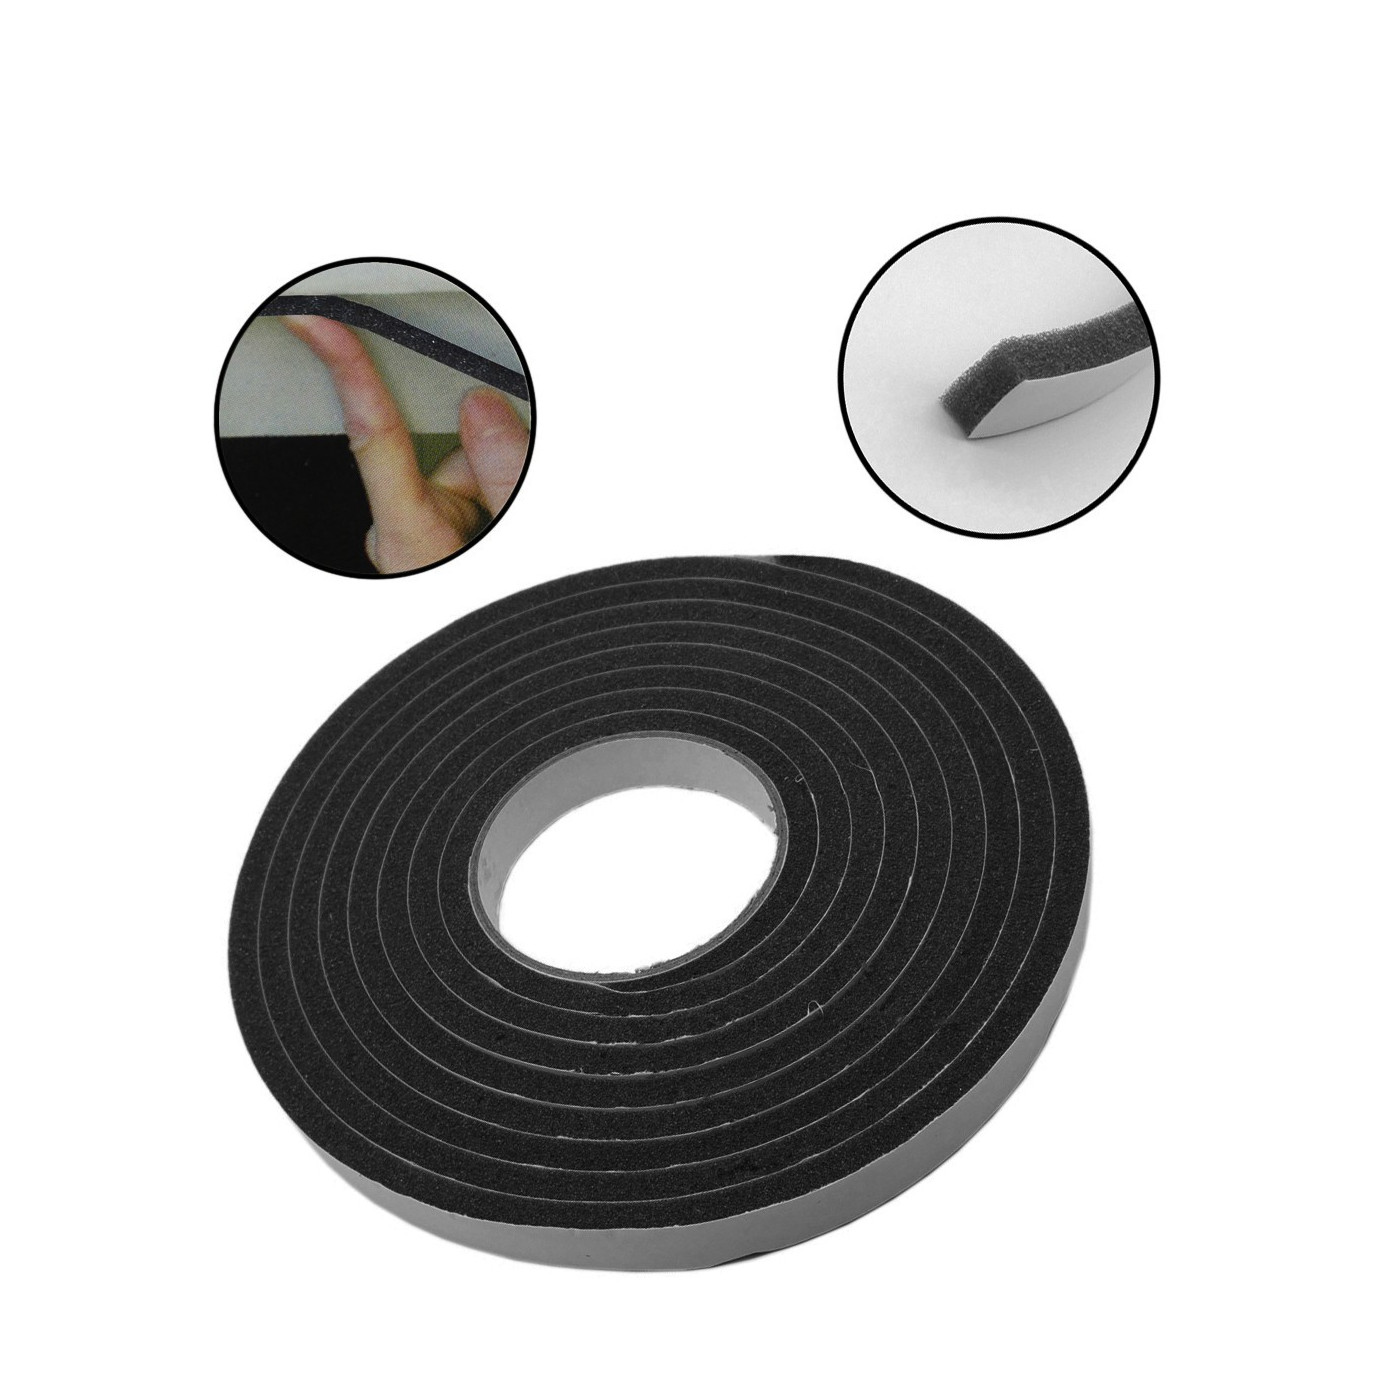 total 26 feet long black 2 pieces foam tape Self-adhesive sealing tape 9 mm wide 6 mm thick 